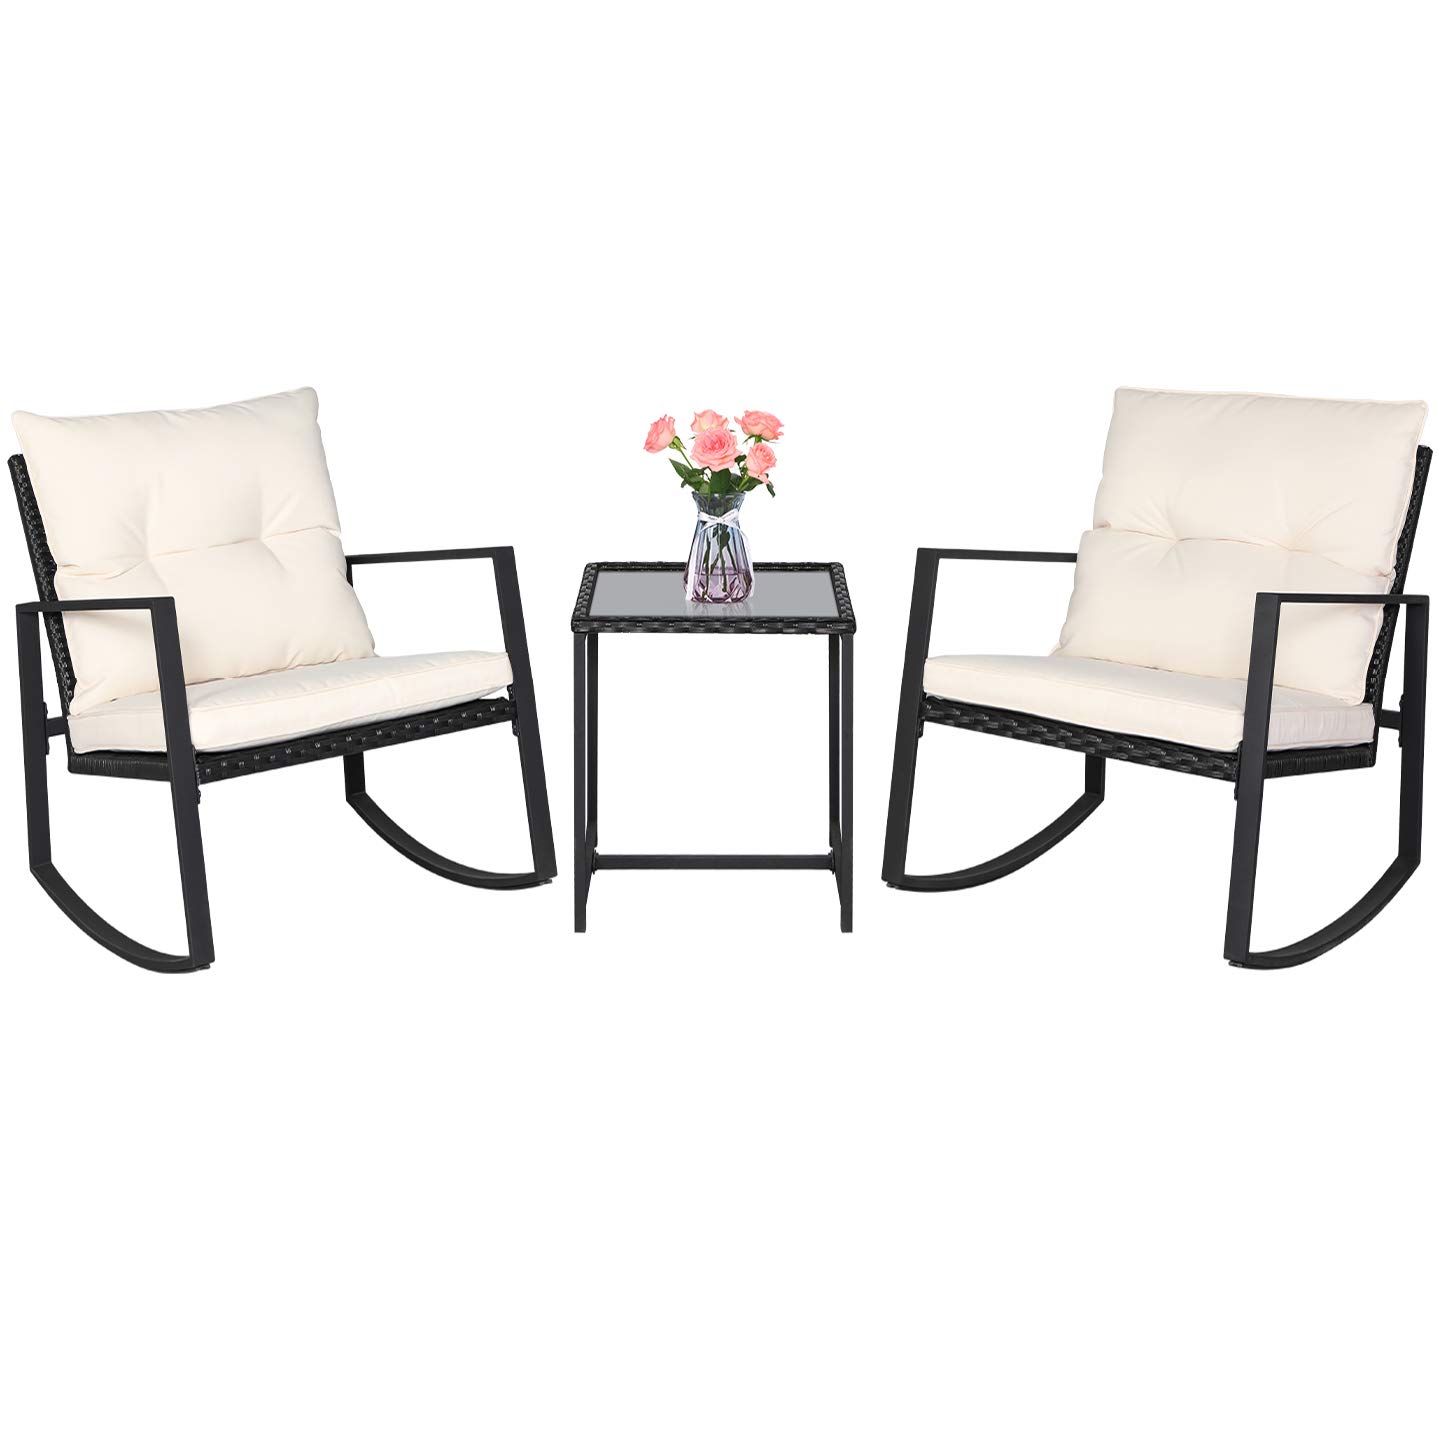 SUNCROWN 3-Piece Outdoor Patio Wicker Bistro Rocking Chair Set - Two Chairs with Glass Coffee Table (Beige-White Cushion) Black - image 1 of 7